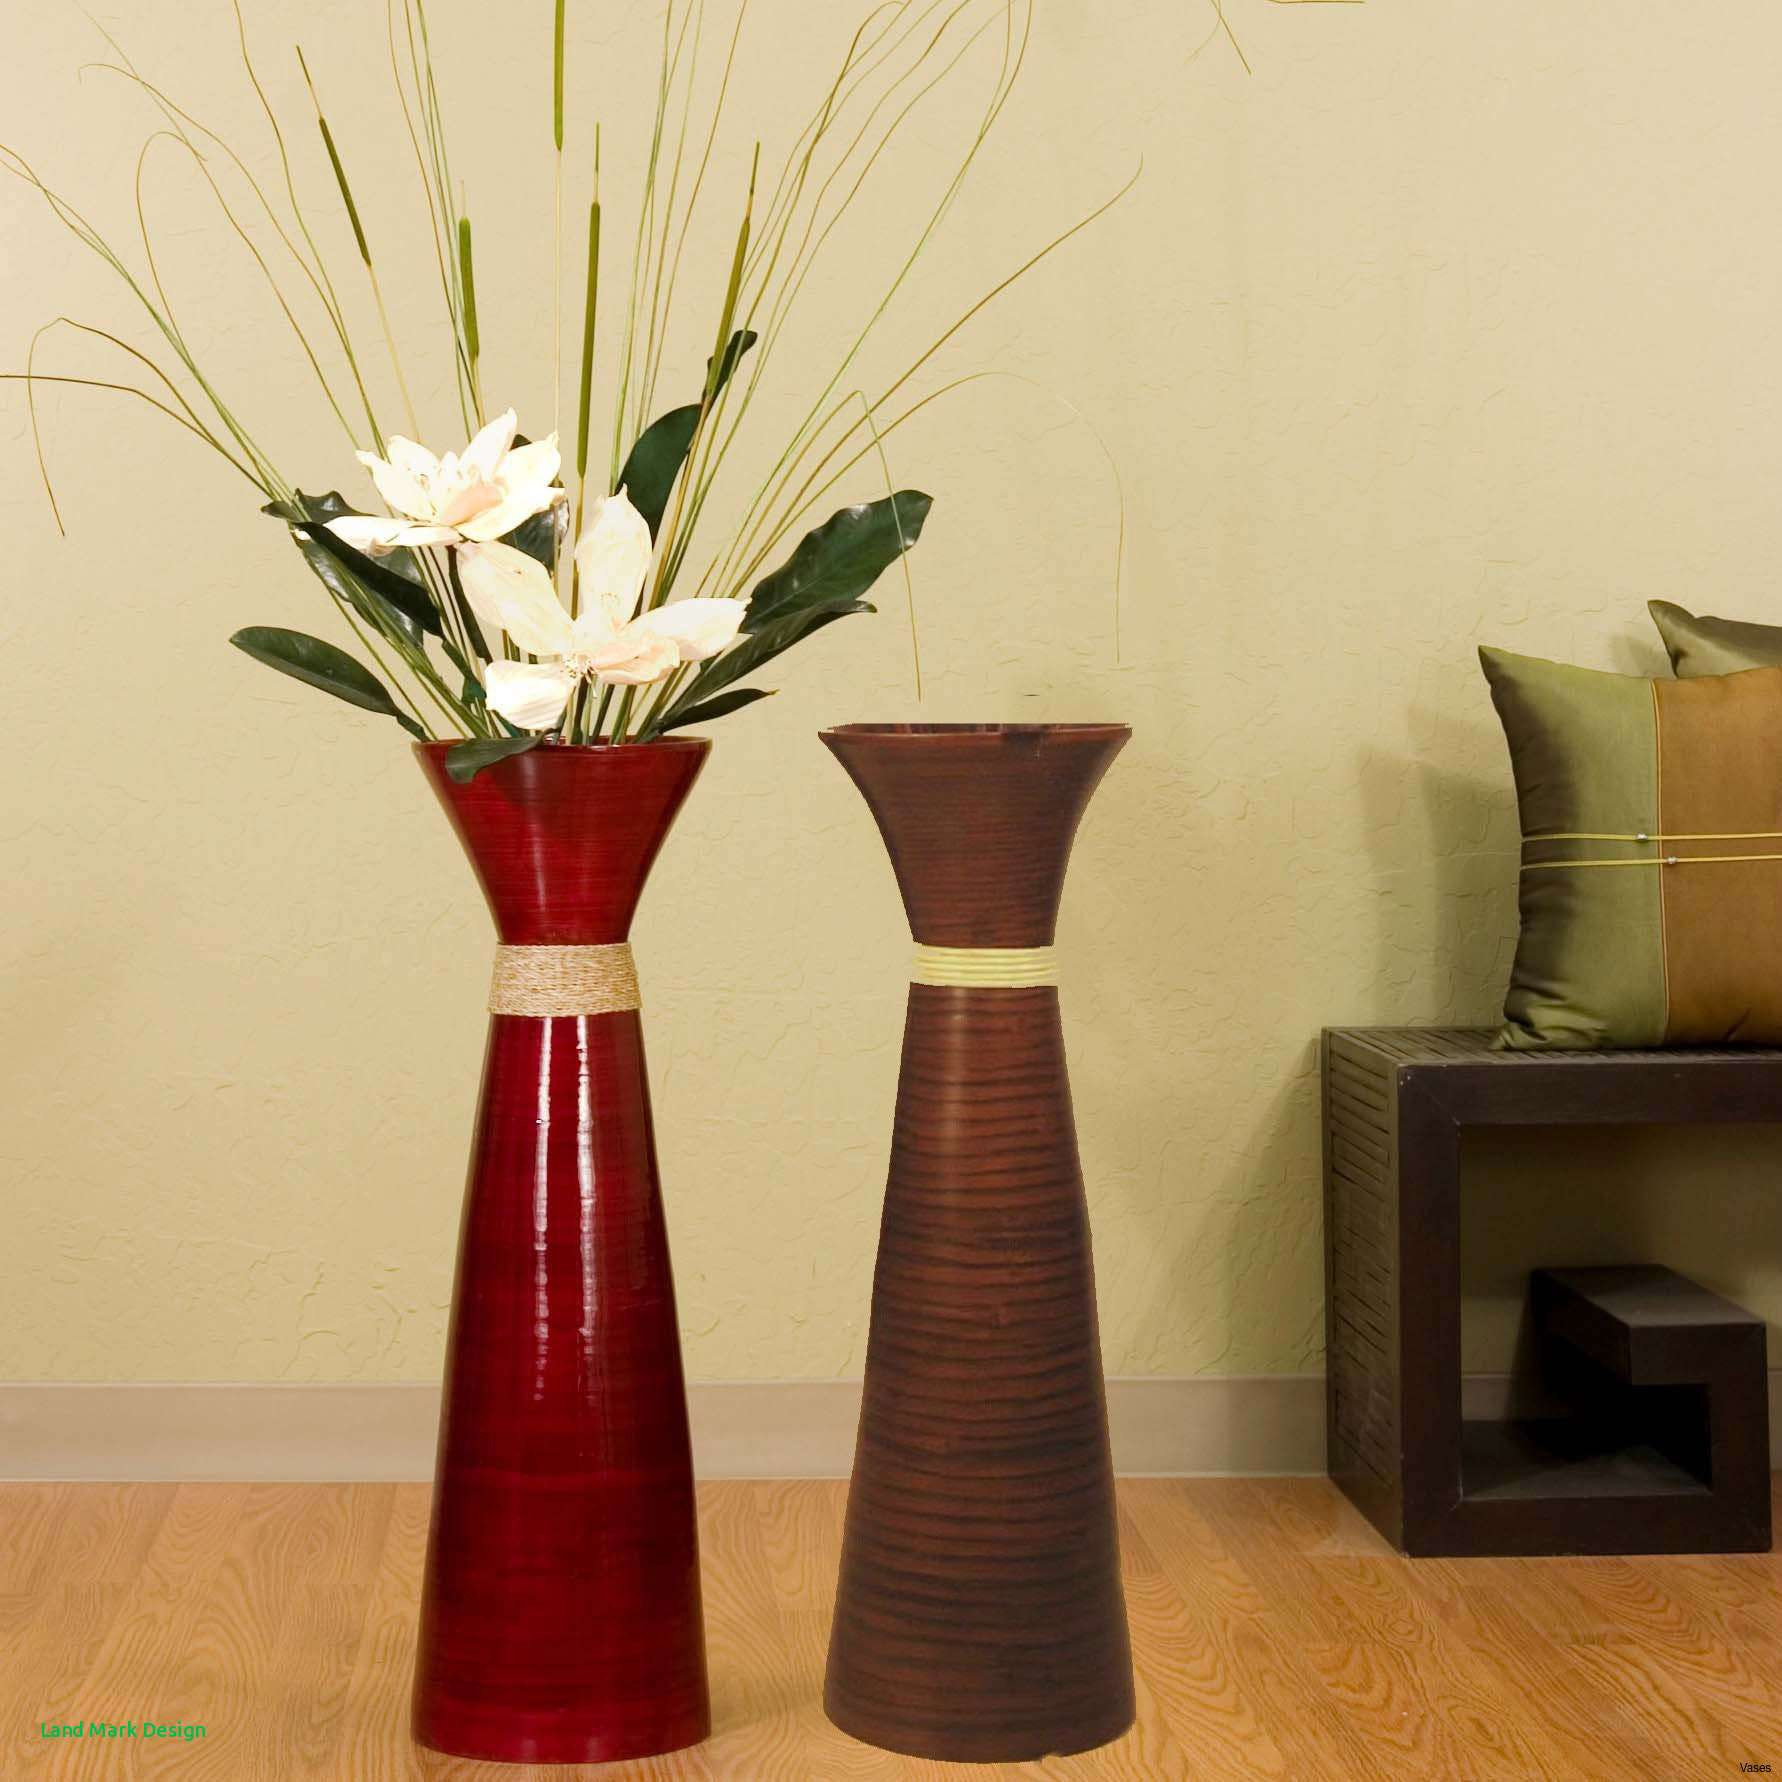 18 Nice Standing Vases for Living Room 2022 free download standing vases for living room of floor vases decoration ideas design home design pertaining to floor vase colorsh vases red decorative image of colorsi 0d